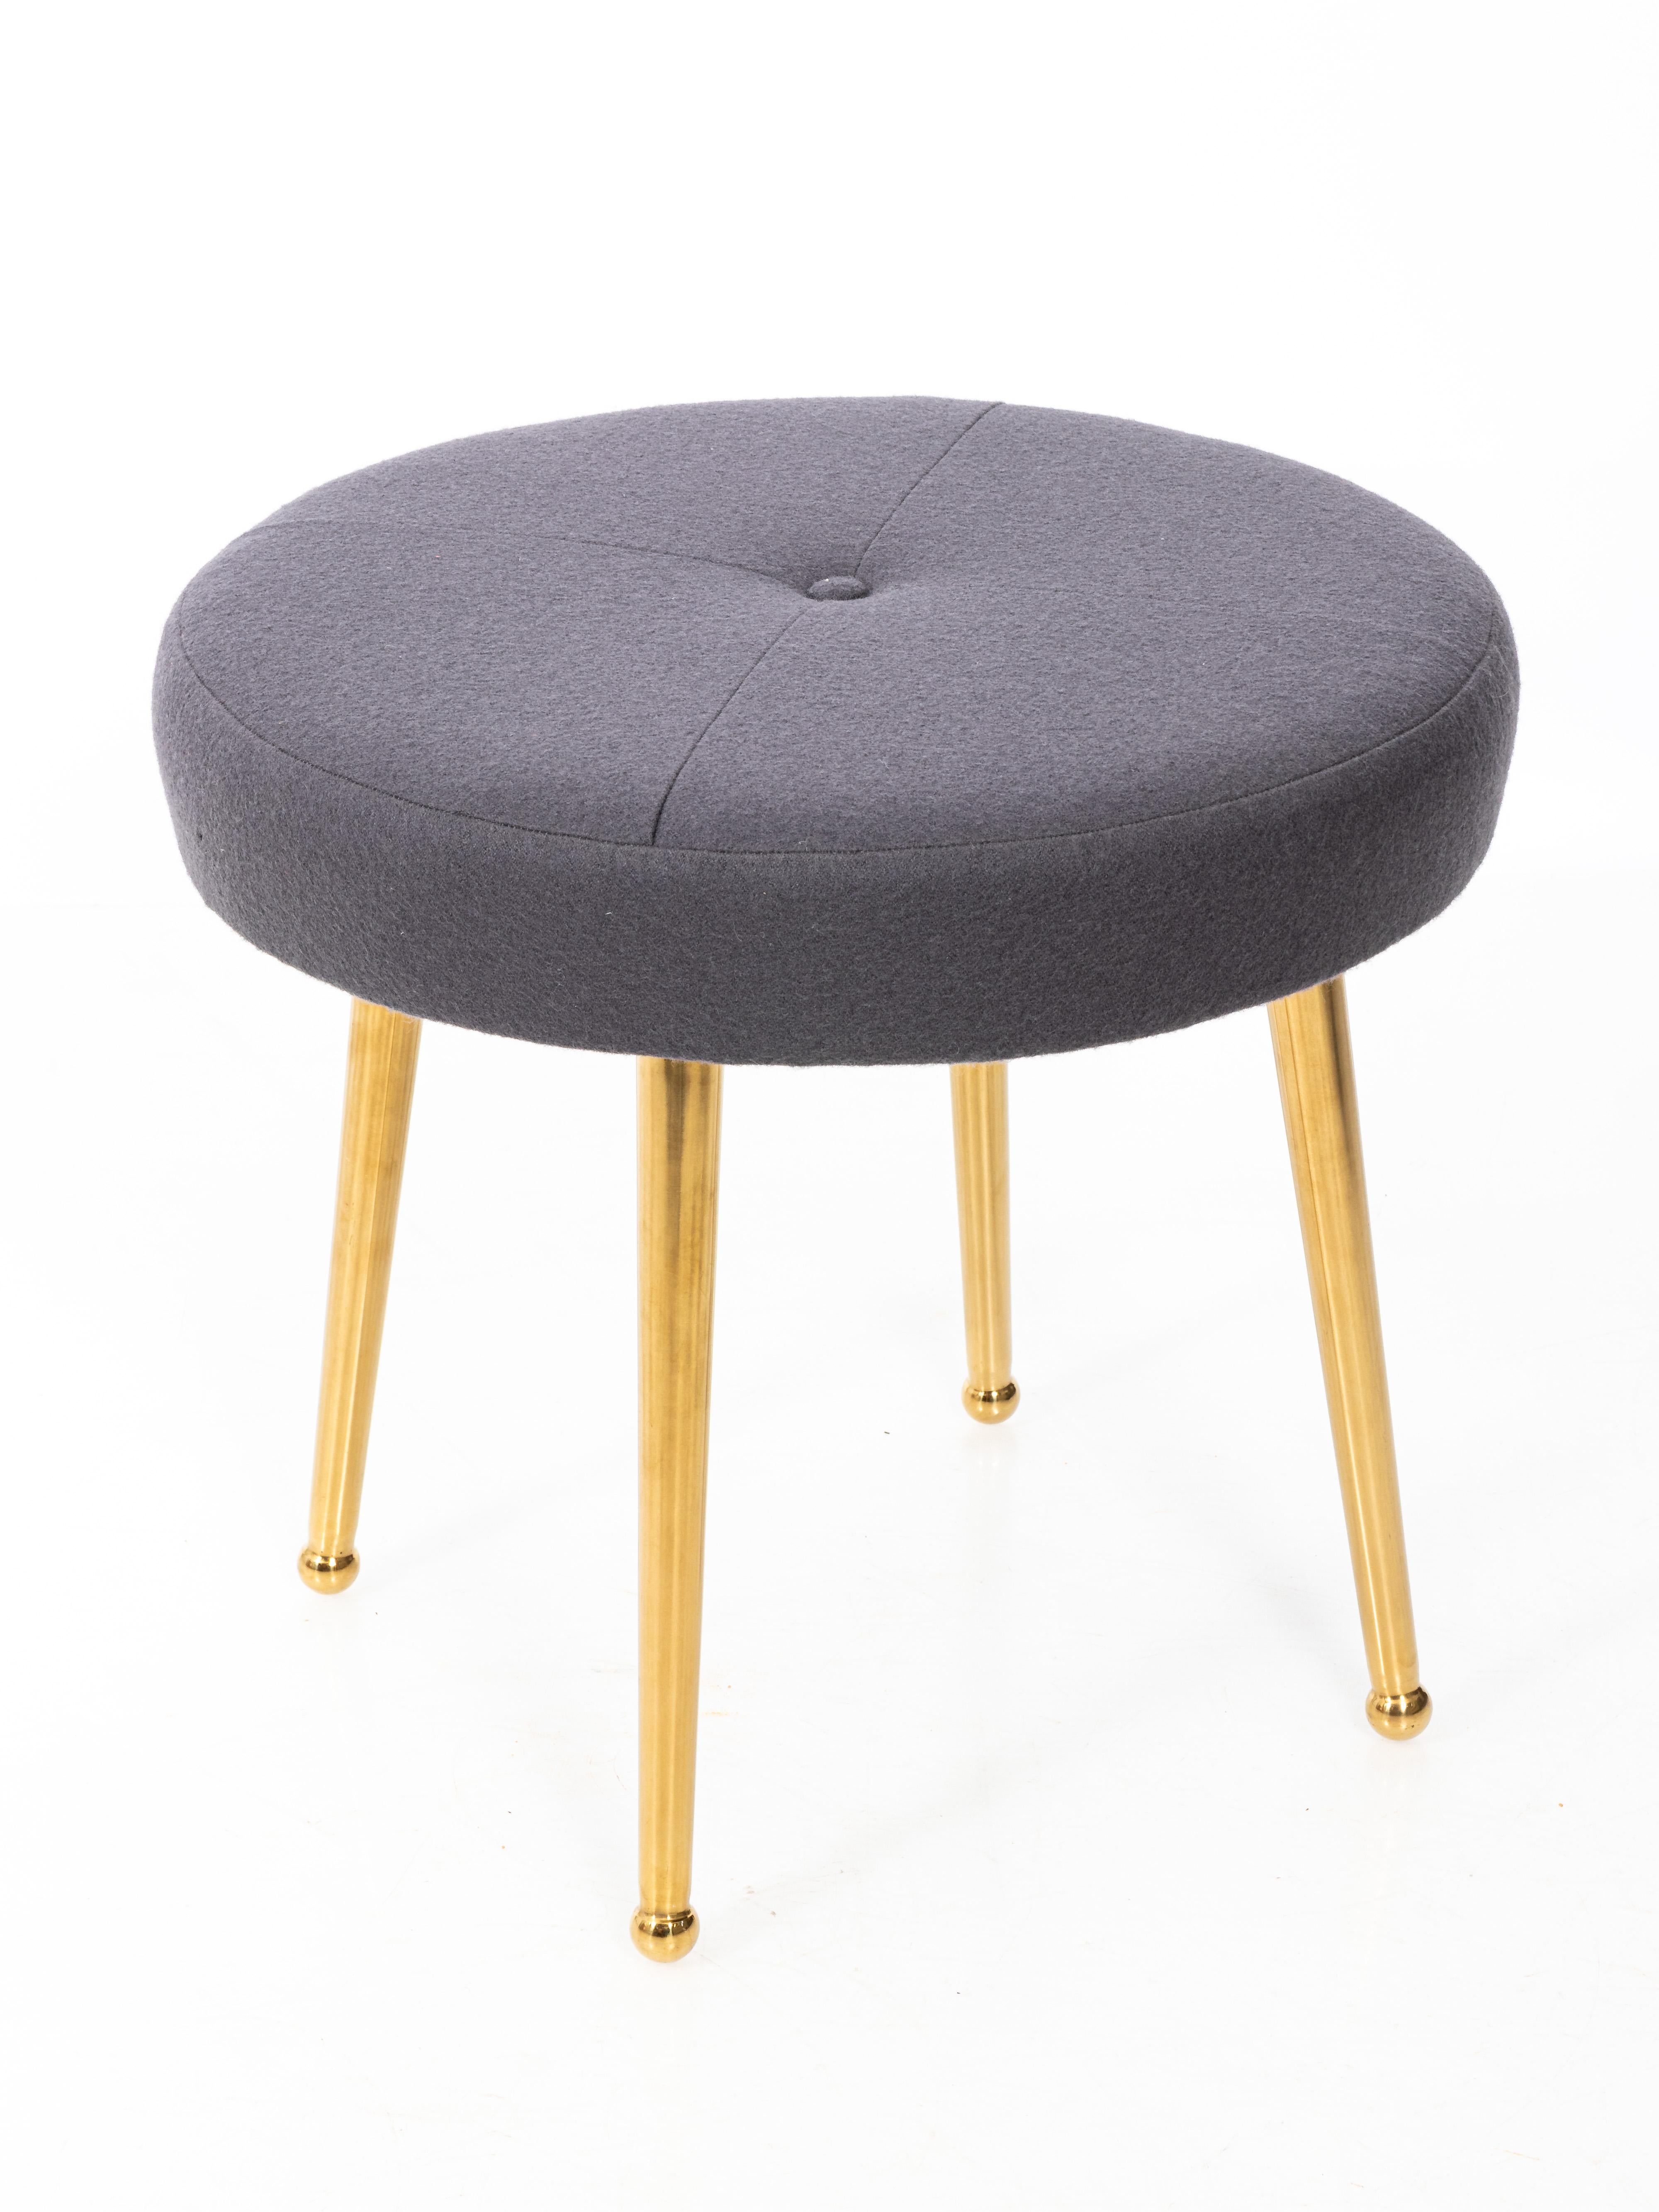 Pair of custom midcentury style round stools. Shown with brass legs and wool tops with button and quadrant seaming. Available COM /COL. Can be professionally packed and shipped through UPS.